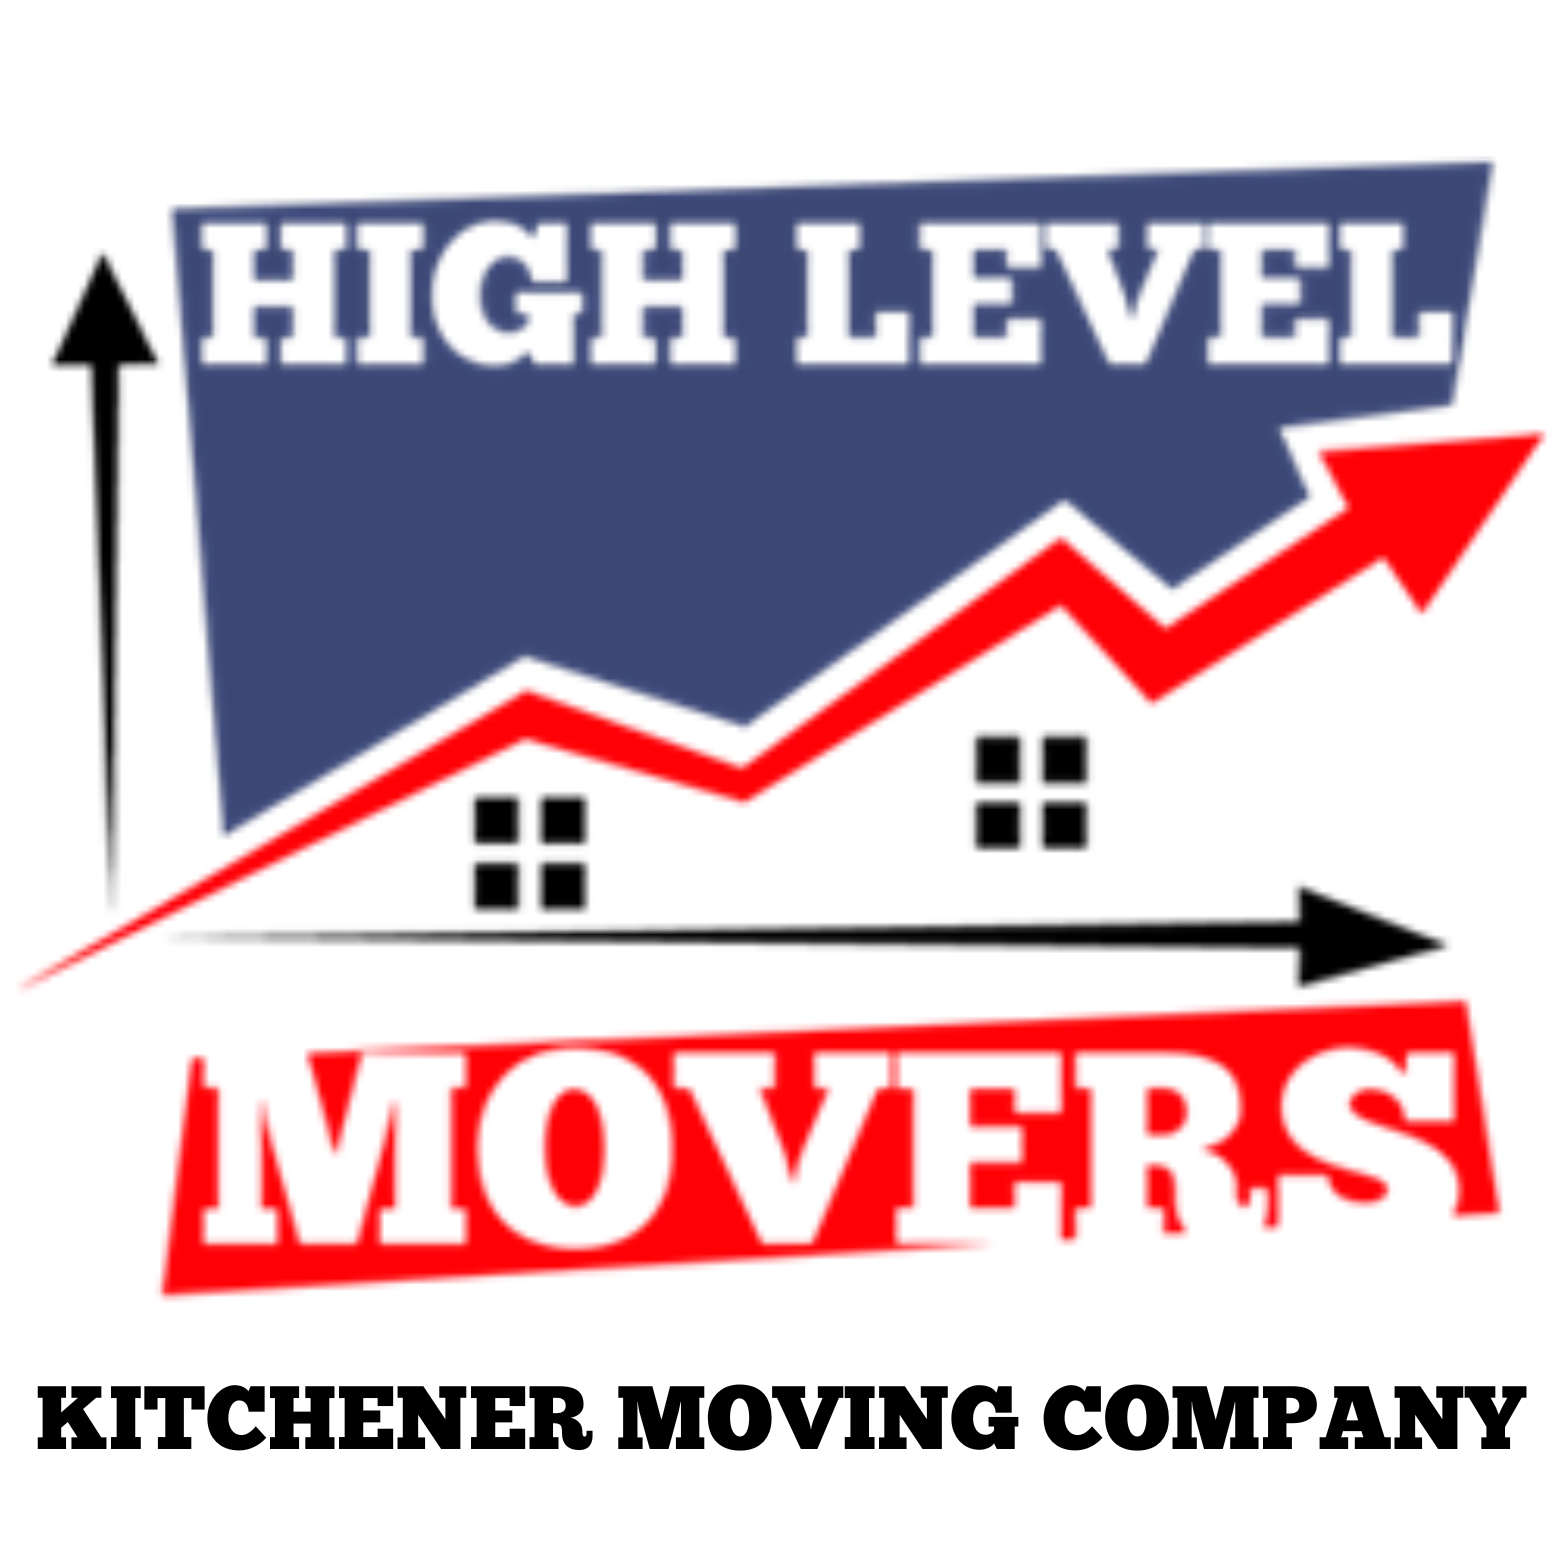 High Level Movers Kitchener-